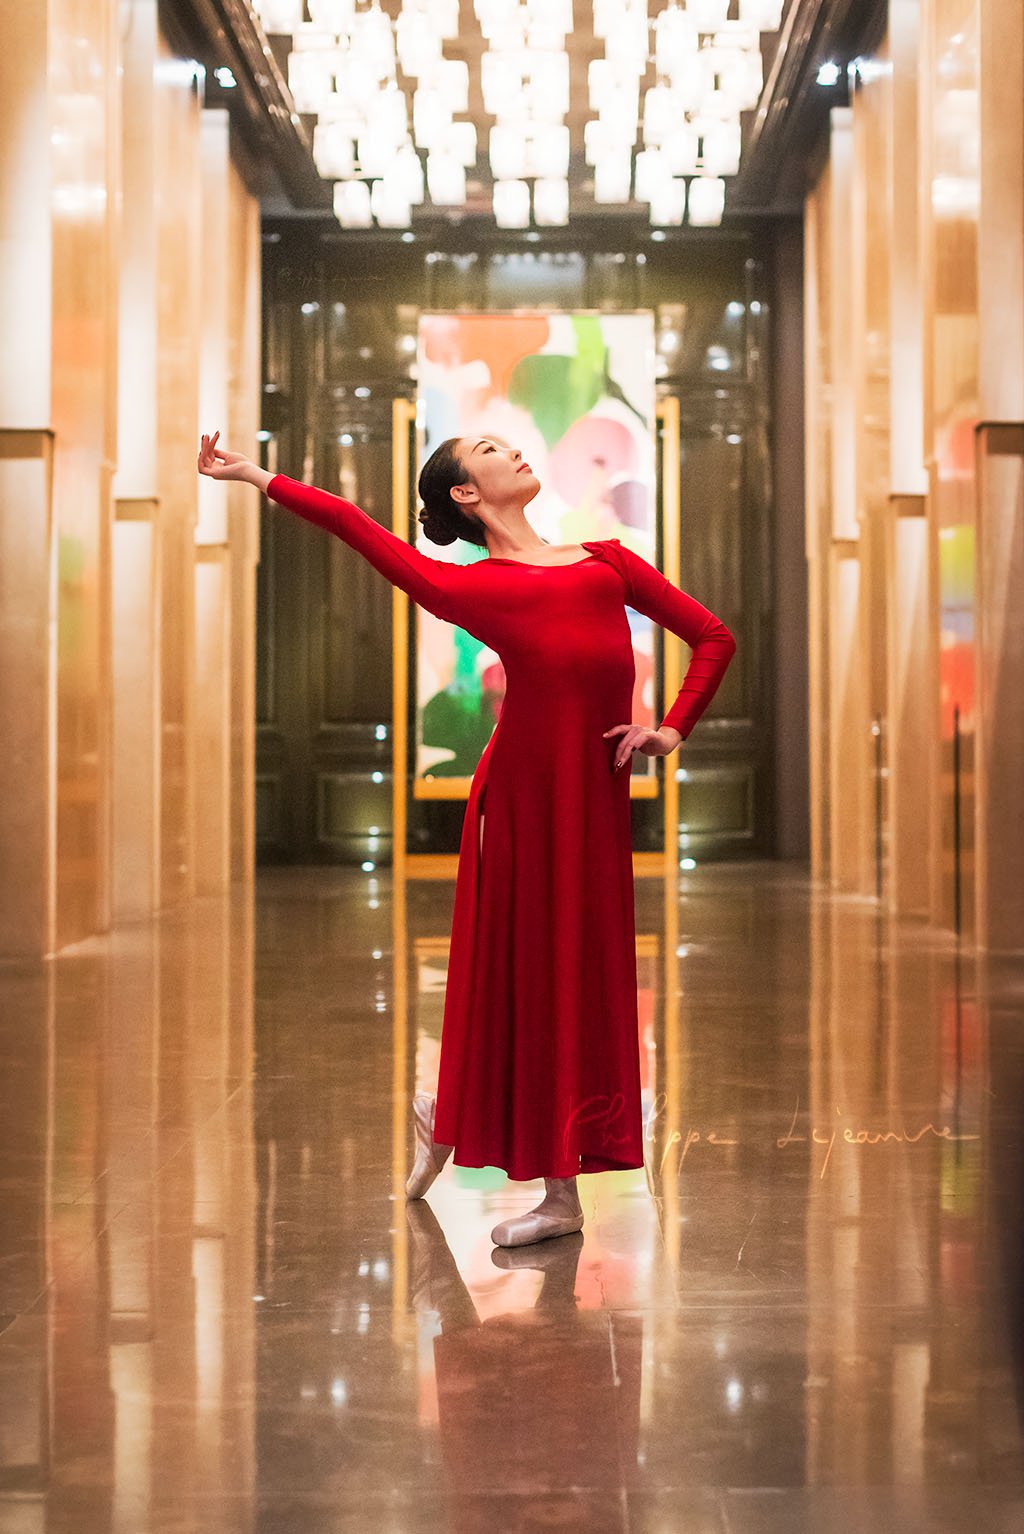 Ballerina dancing in an hotel hall - Photo session organized by @oyuxi for the @instachengdu instagram meetup at Grand Hyatt hotel, Chengdu, Sichuan province, China